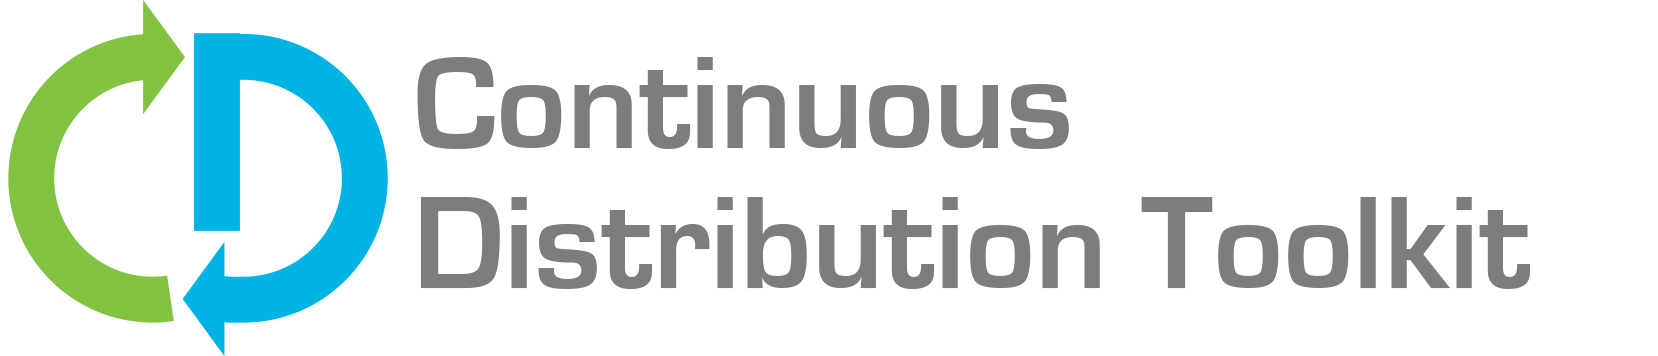 Continuous Distribution Toolkit